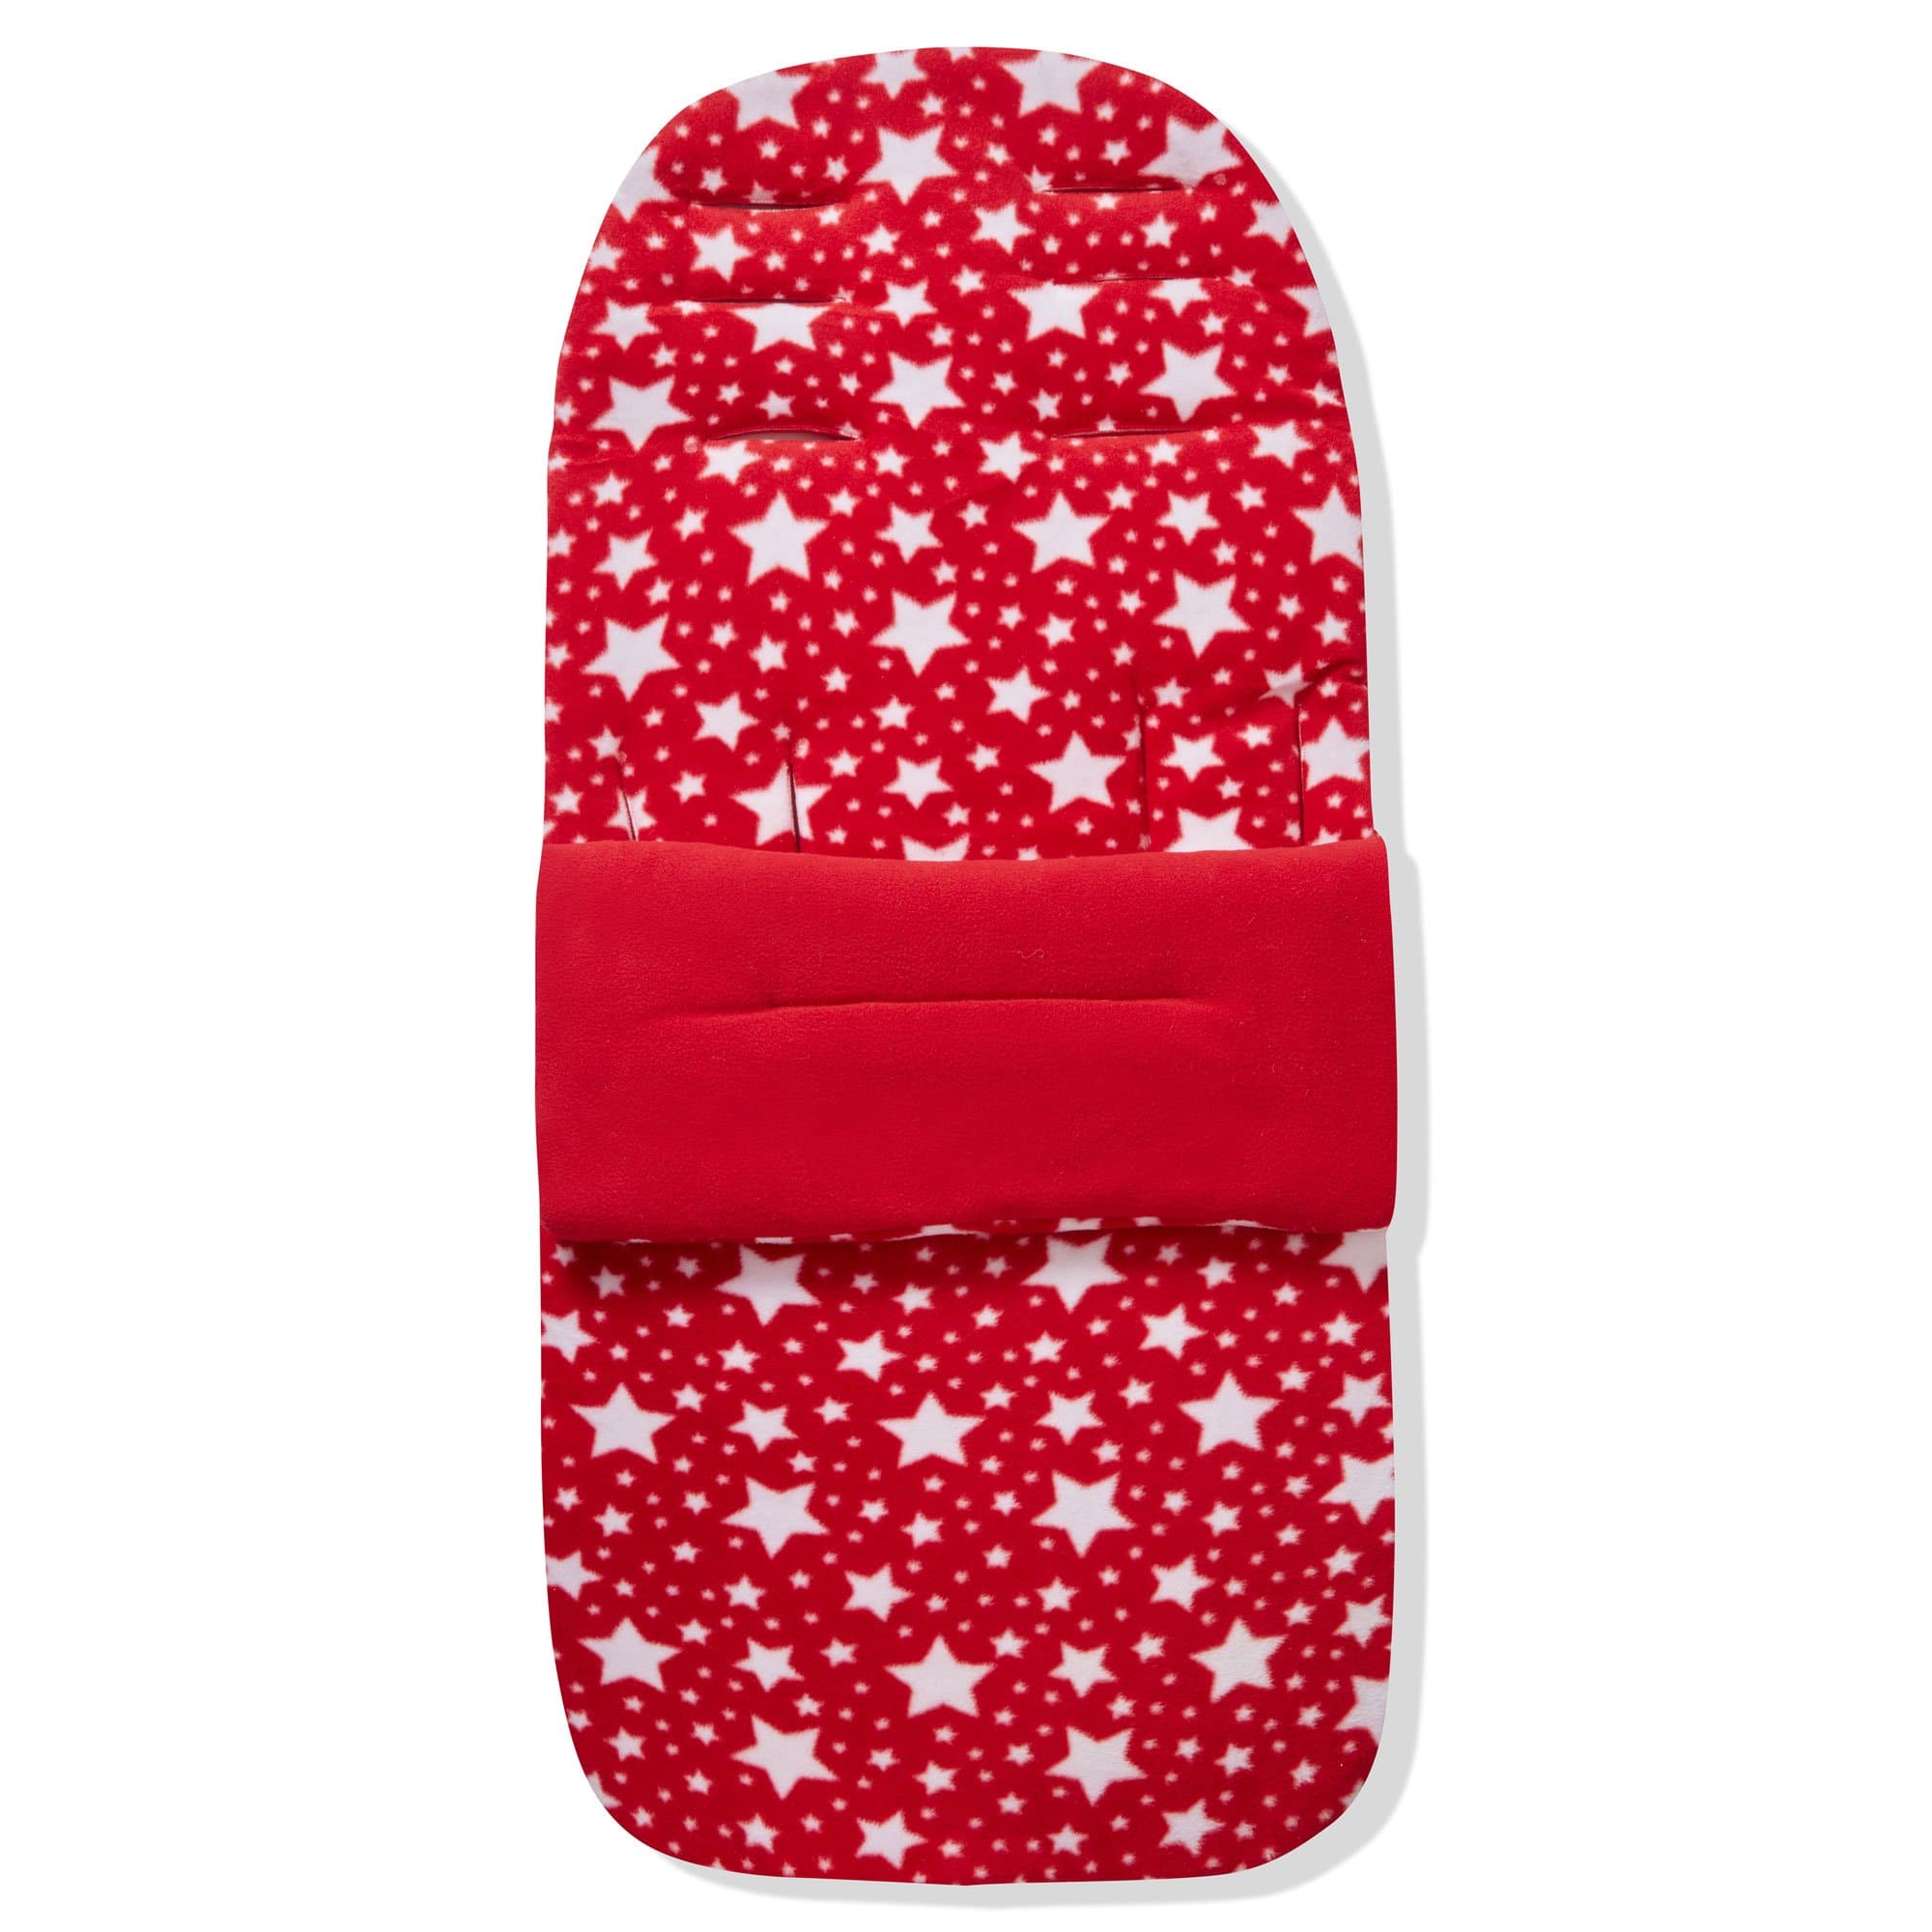 Fleece Footmuff / Cosy Toes Compatible with Hartan - Red Star / Fits All Models | For Your Little One